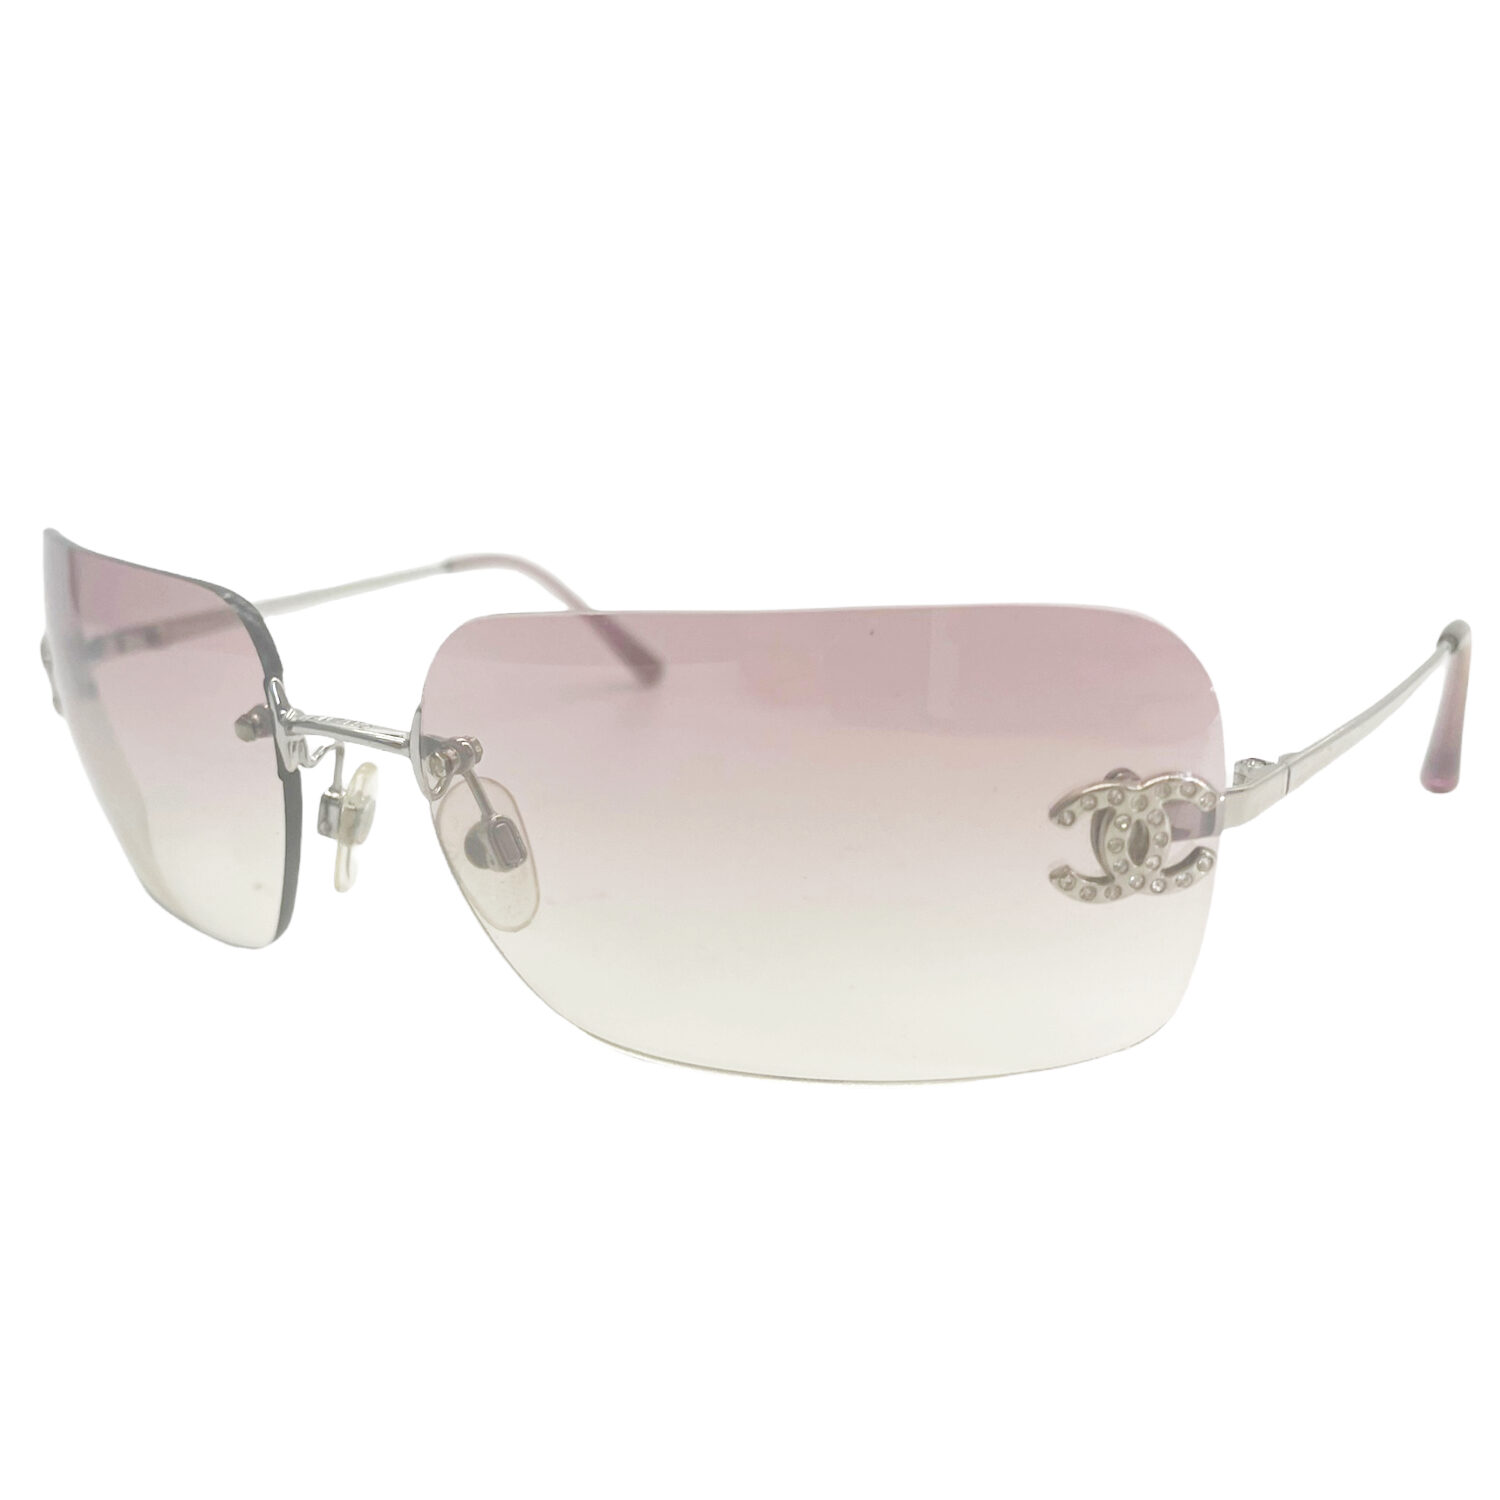 Vintage Chanel Diamante Rimless Ombre Sunglasses in Baby Pink | NITRYL